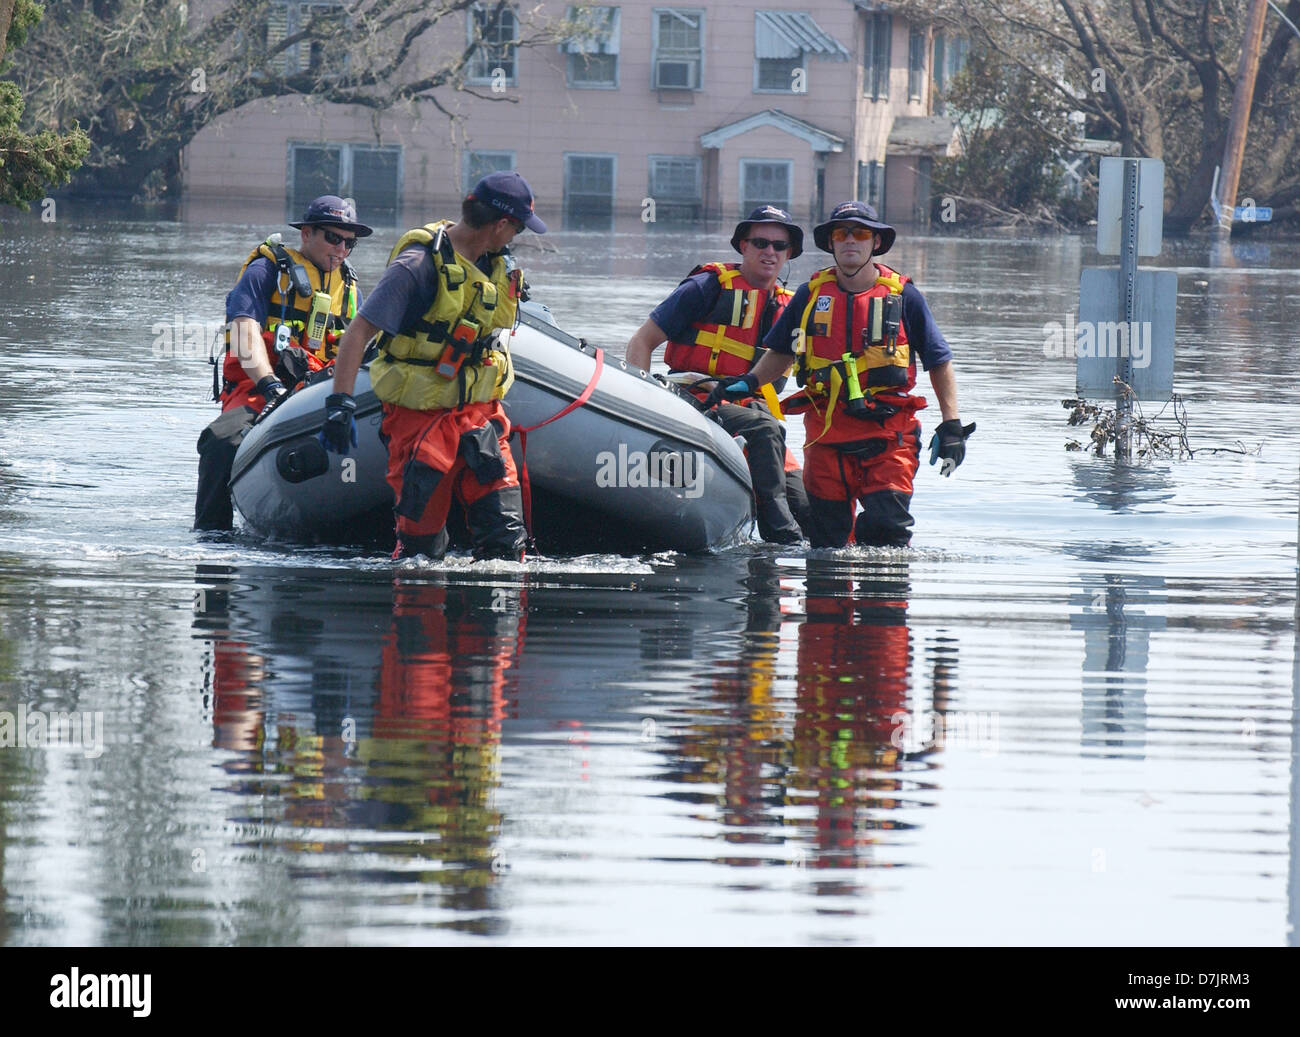 FEMA Urban Search and Rescue teams continue search operations into flooded and damaged areas of the city destroyed by Hurricane Katrina September 8, 2005 in New Orleans, LA. Stock Photo